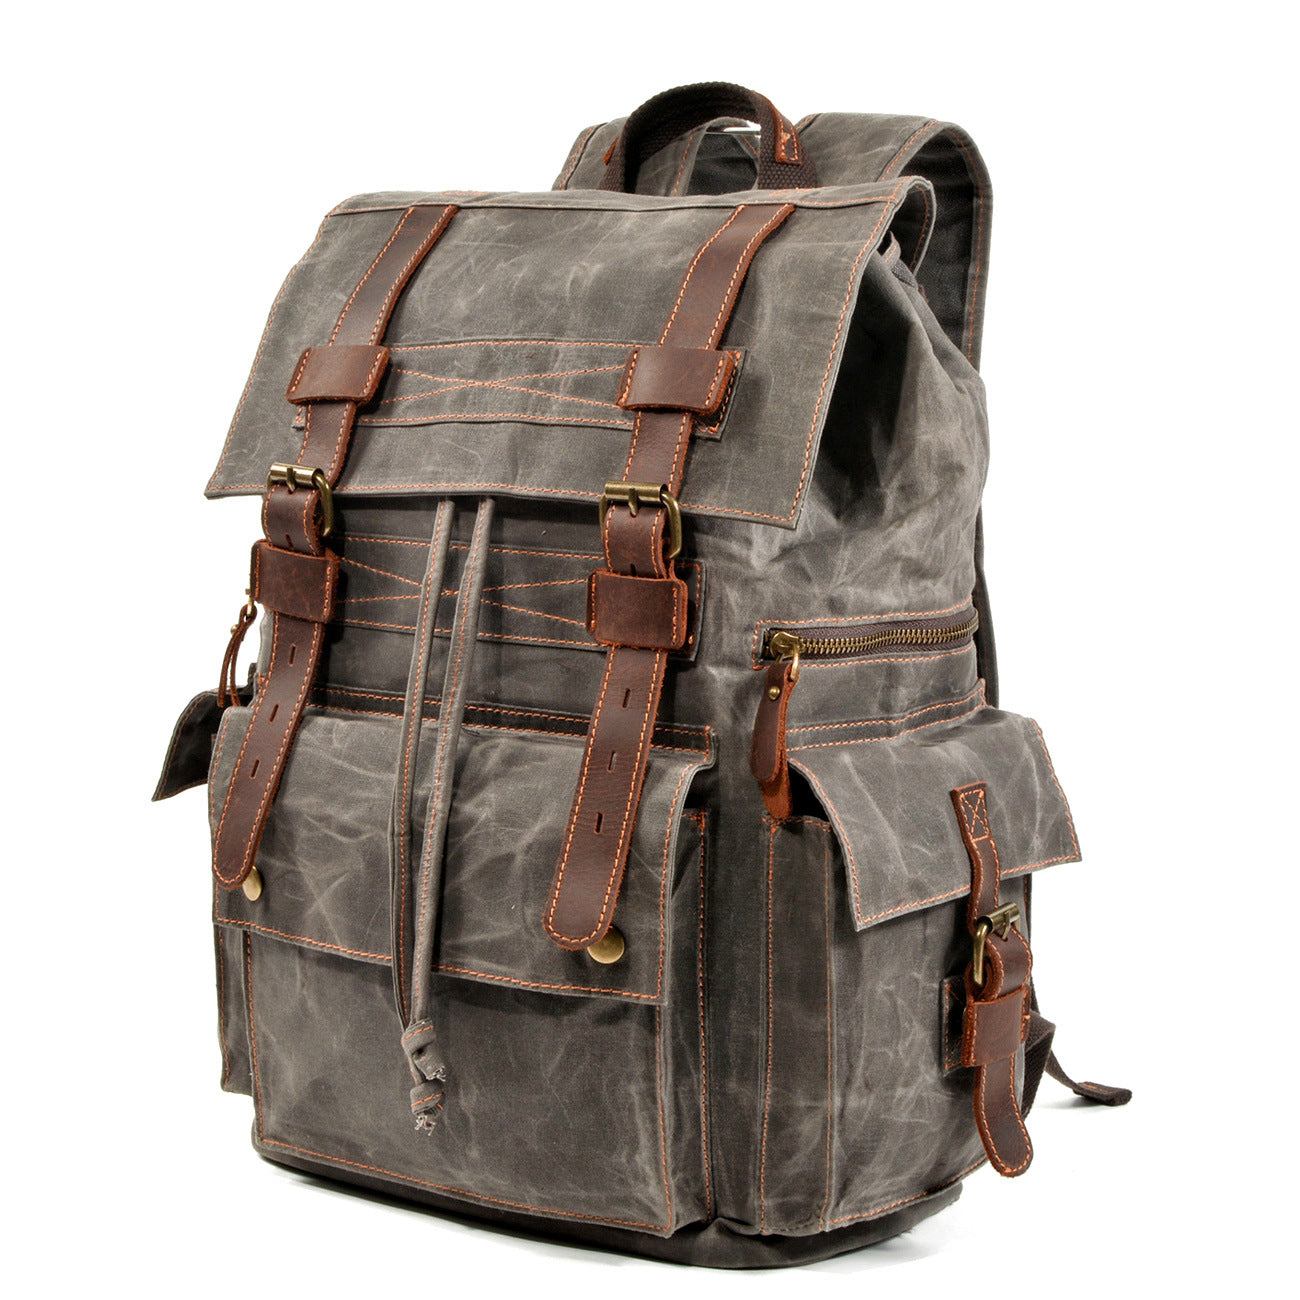 Men's Beeswax Canvas Travel Retro Backpack